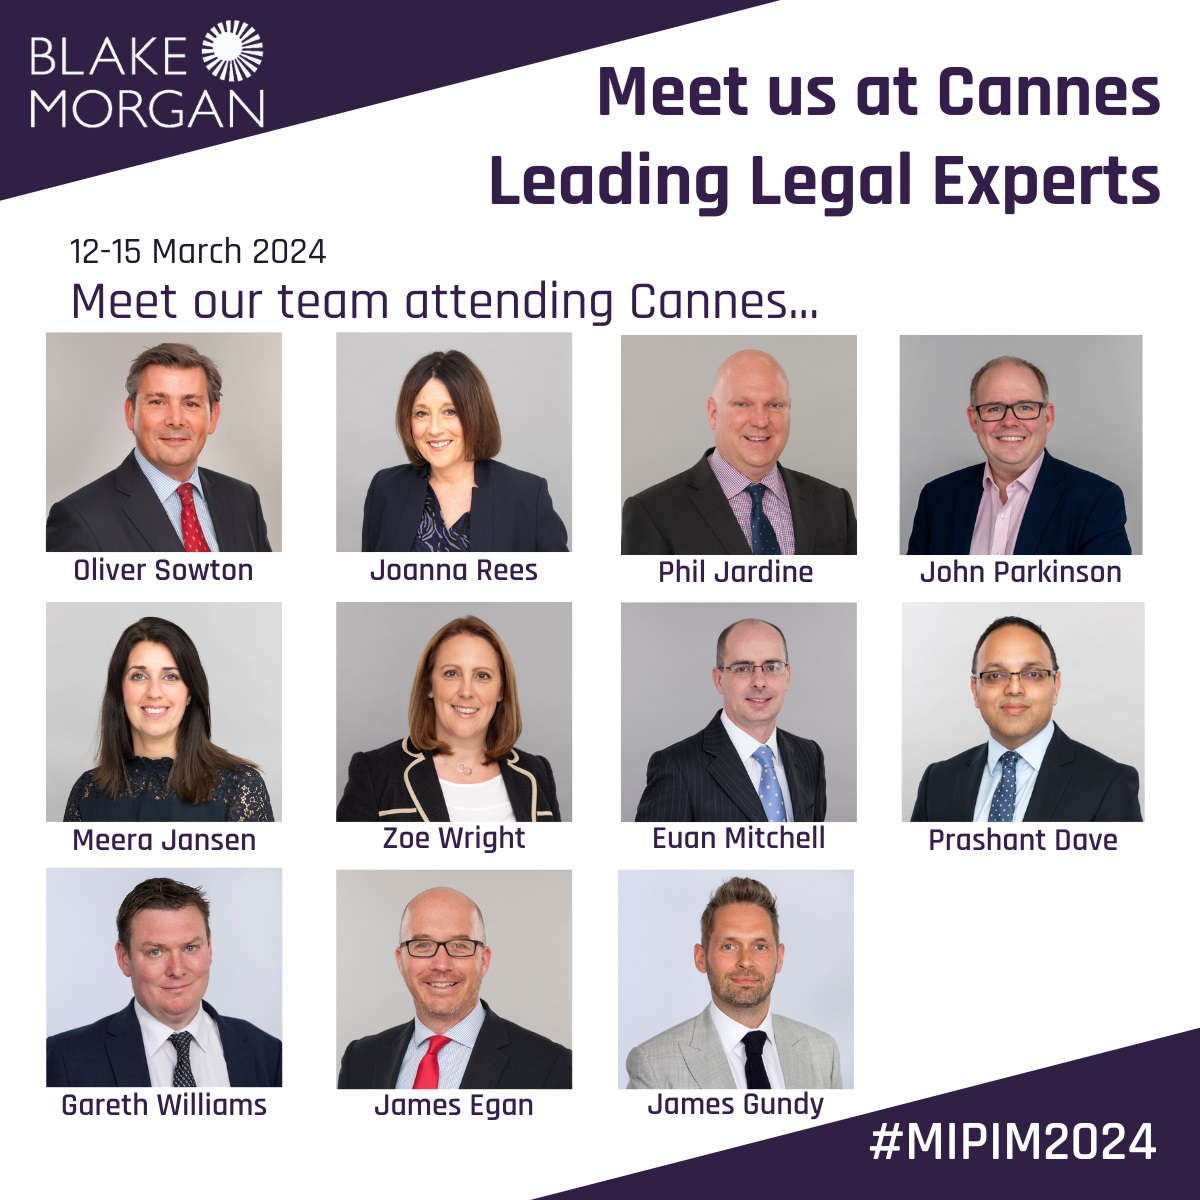 If you are attending #MIPIM2024, arrange to meet up with our legal experts who will be  promoting sustainable growth.

We have a team who will be in Cannes between 12-15 March, with some part of the conferences and events as part of the Central South UK and @CCRMipim.